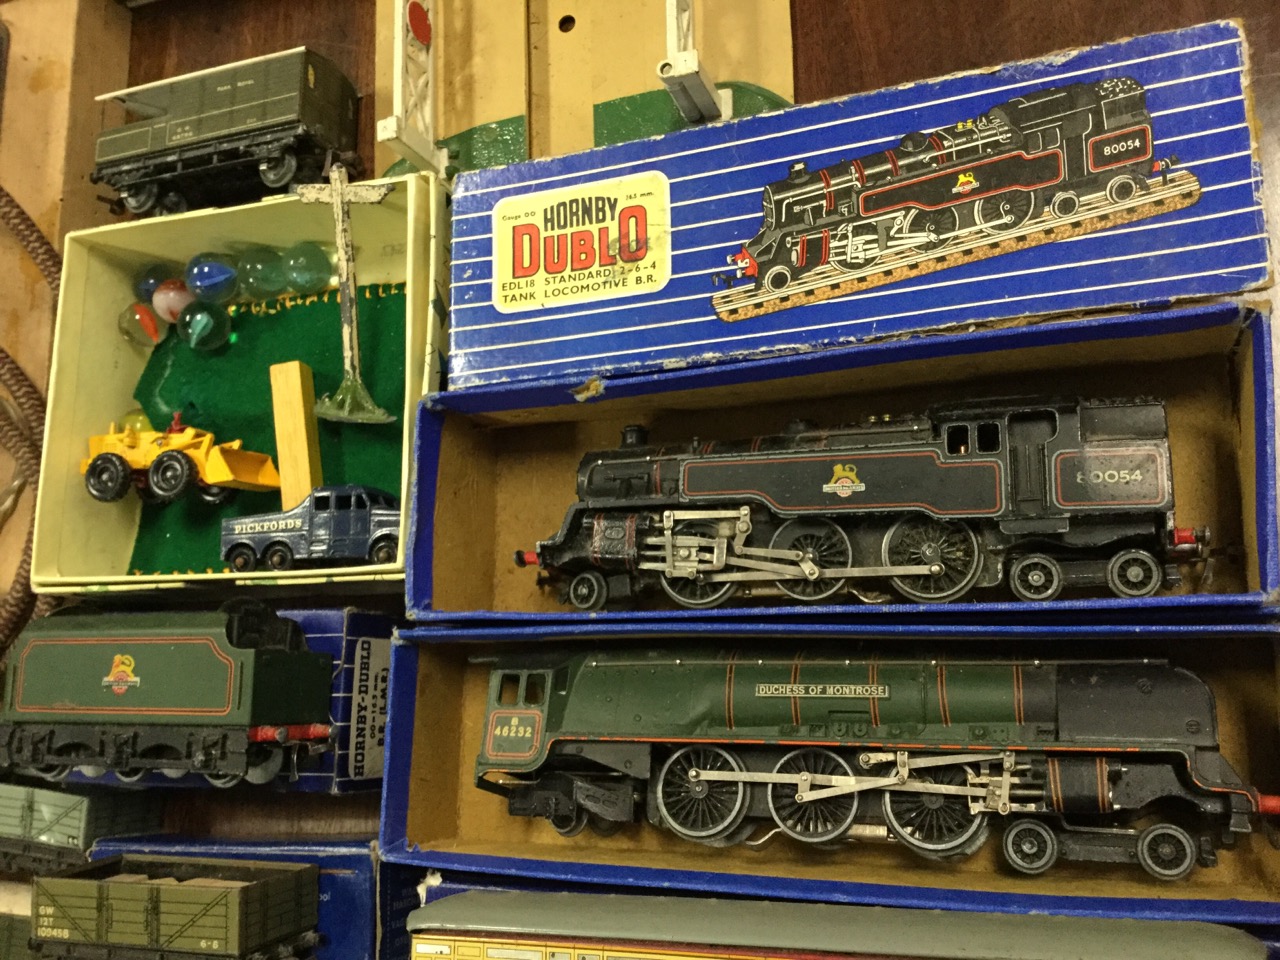 Miscellaneous Hornby Dublo pieces including a boxed Duchess of Montrose engine & tender, a boxed - Image 2 of 3